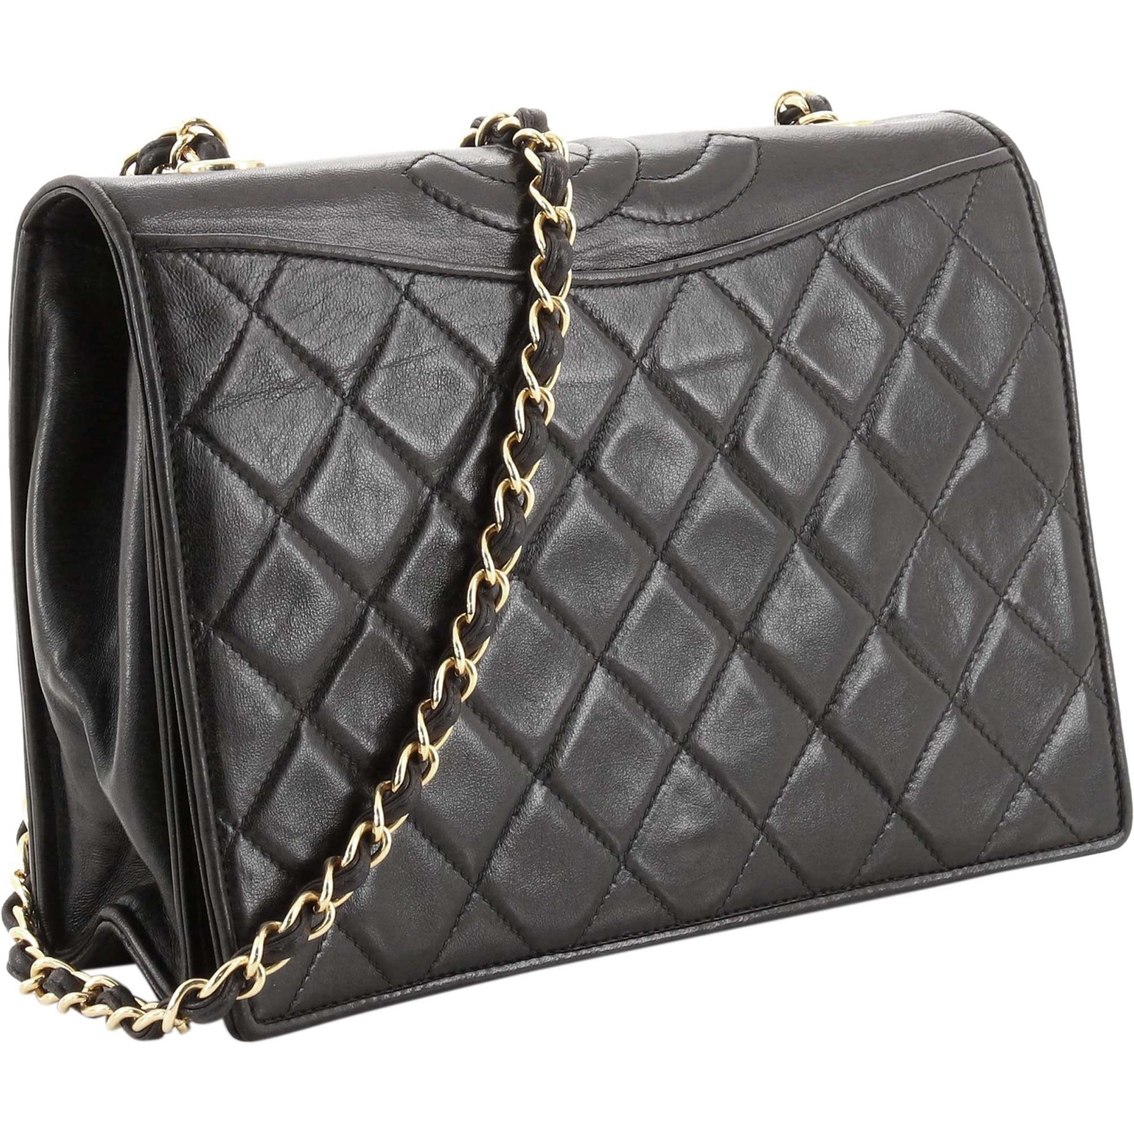 Chanel Vintage Black Quilted Lambskin Leather Cc Full Medium Flap Bag (pre- owned), Shoulder Bags, Clothing & Accessories